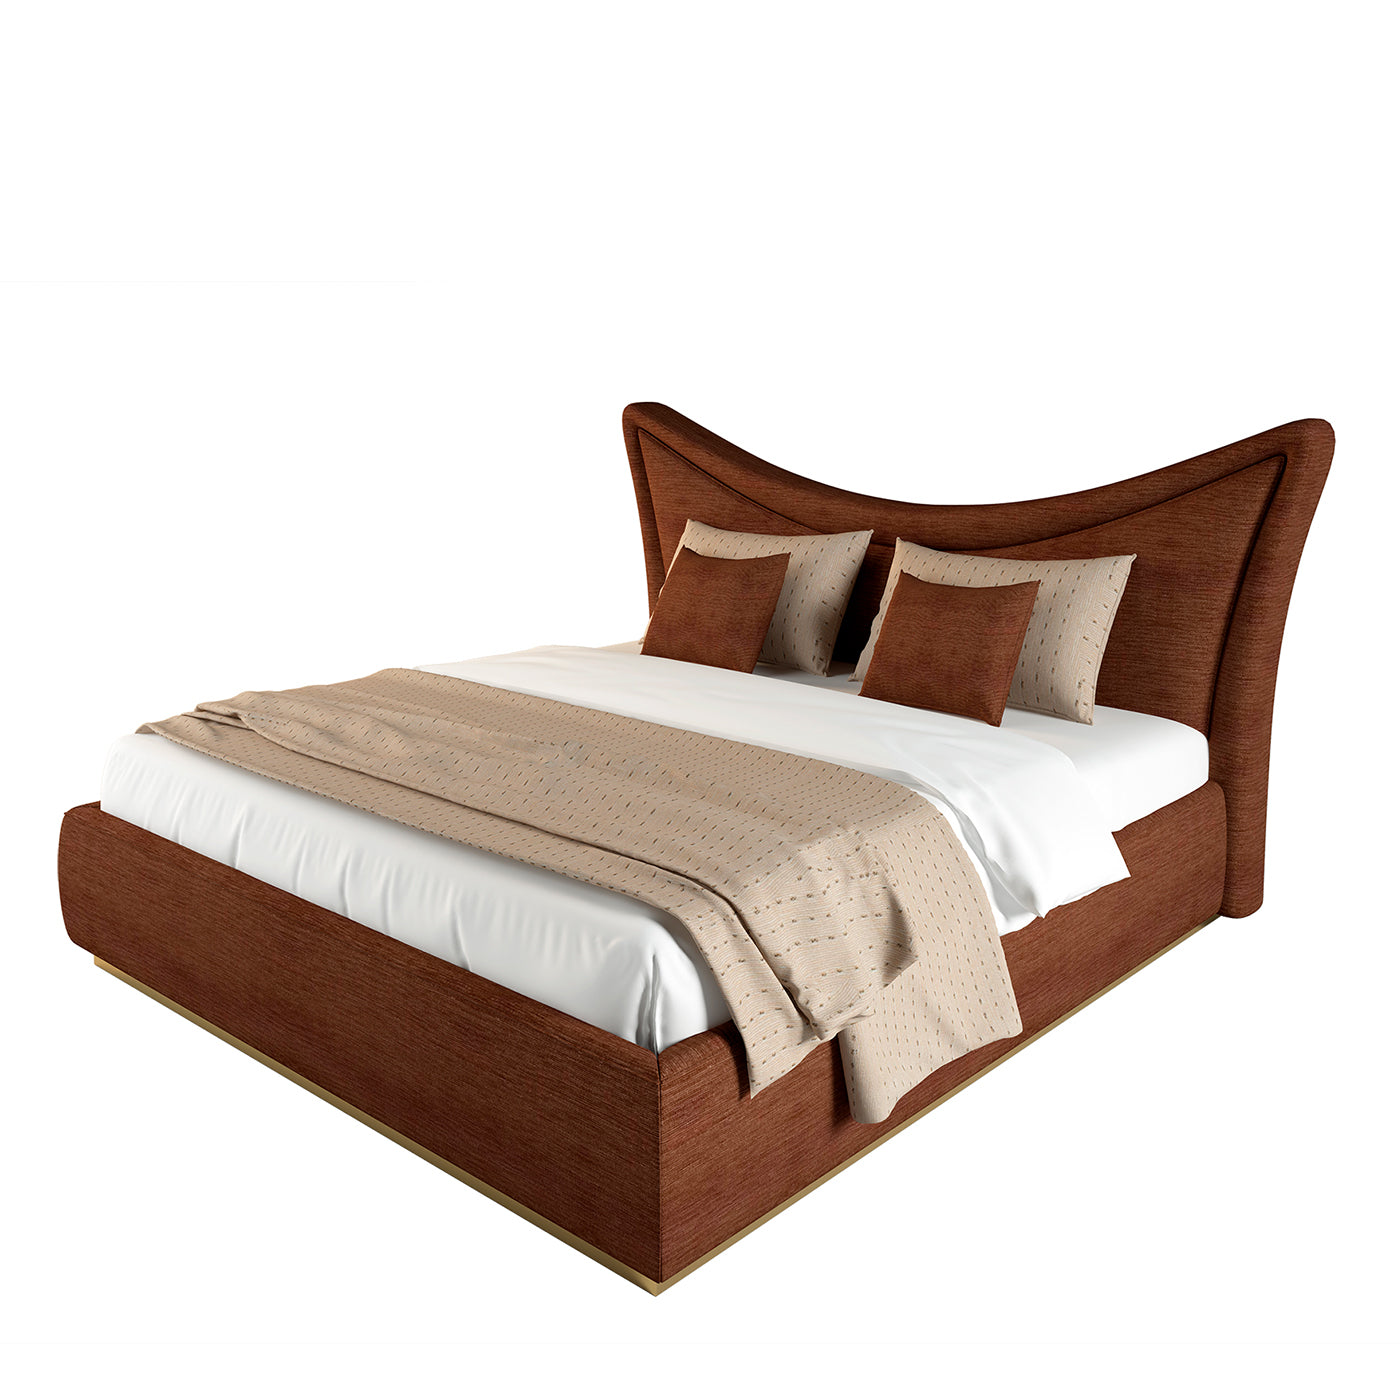 Charme Bed by Hanno Giesler - Alternative view 1